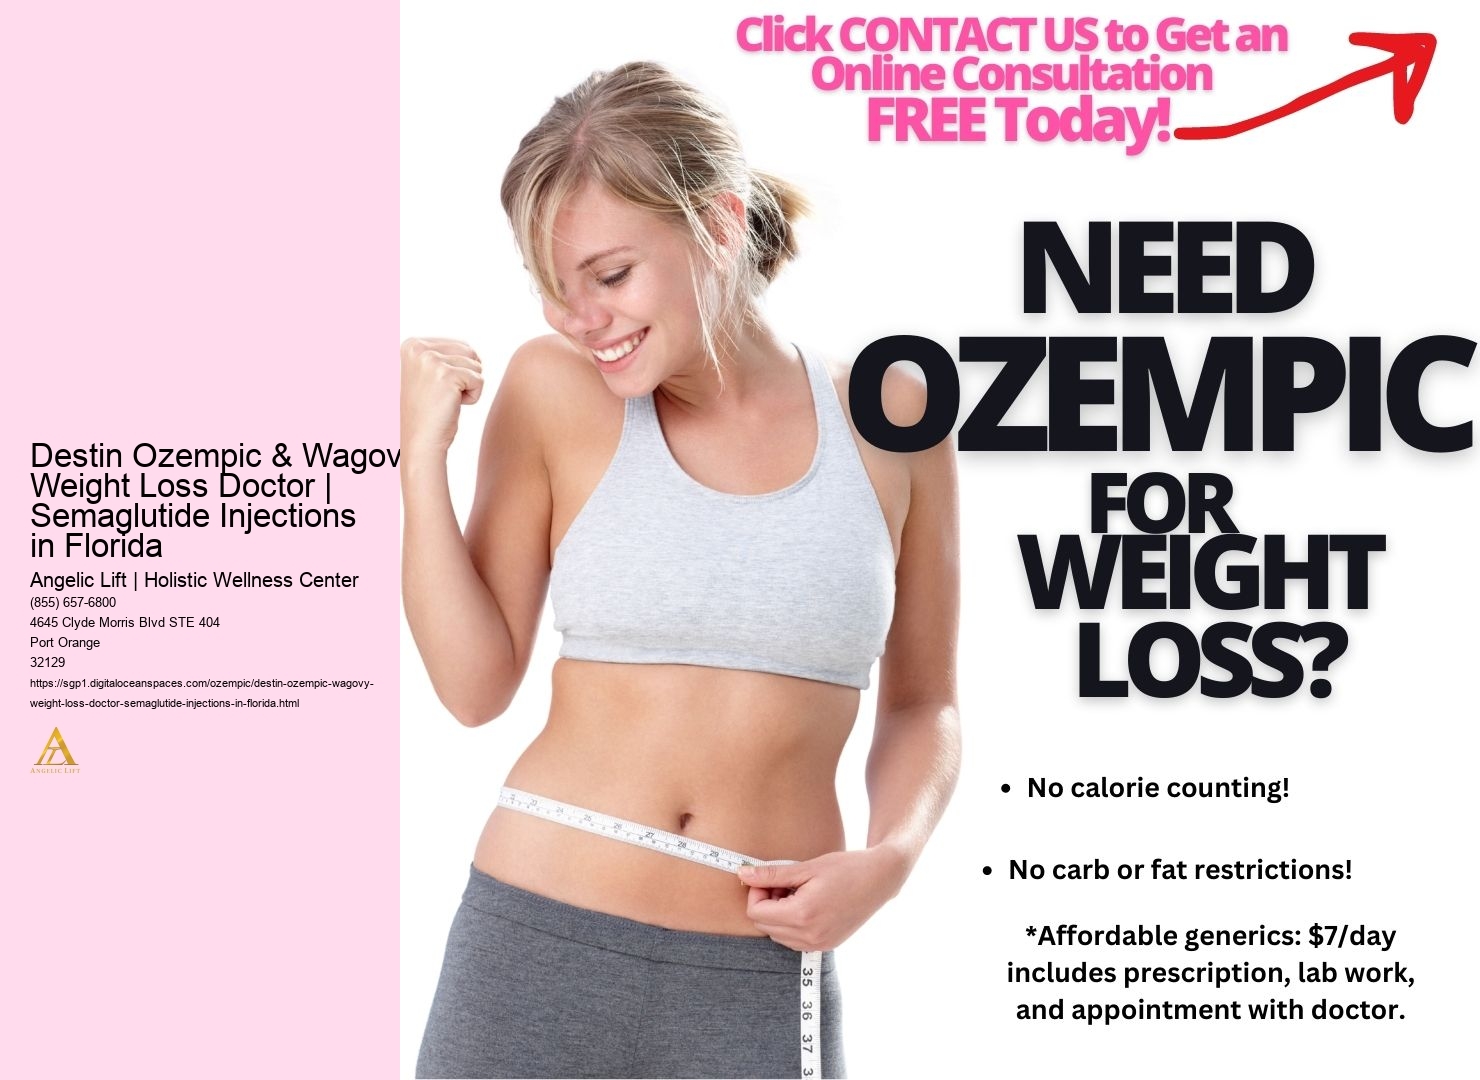 Destin Ozempic & Wagovy Weight Loss Doctor | Semaglutide Injections in Florida